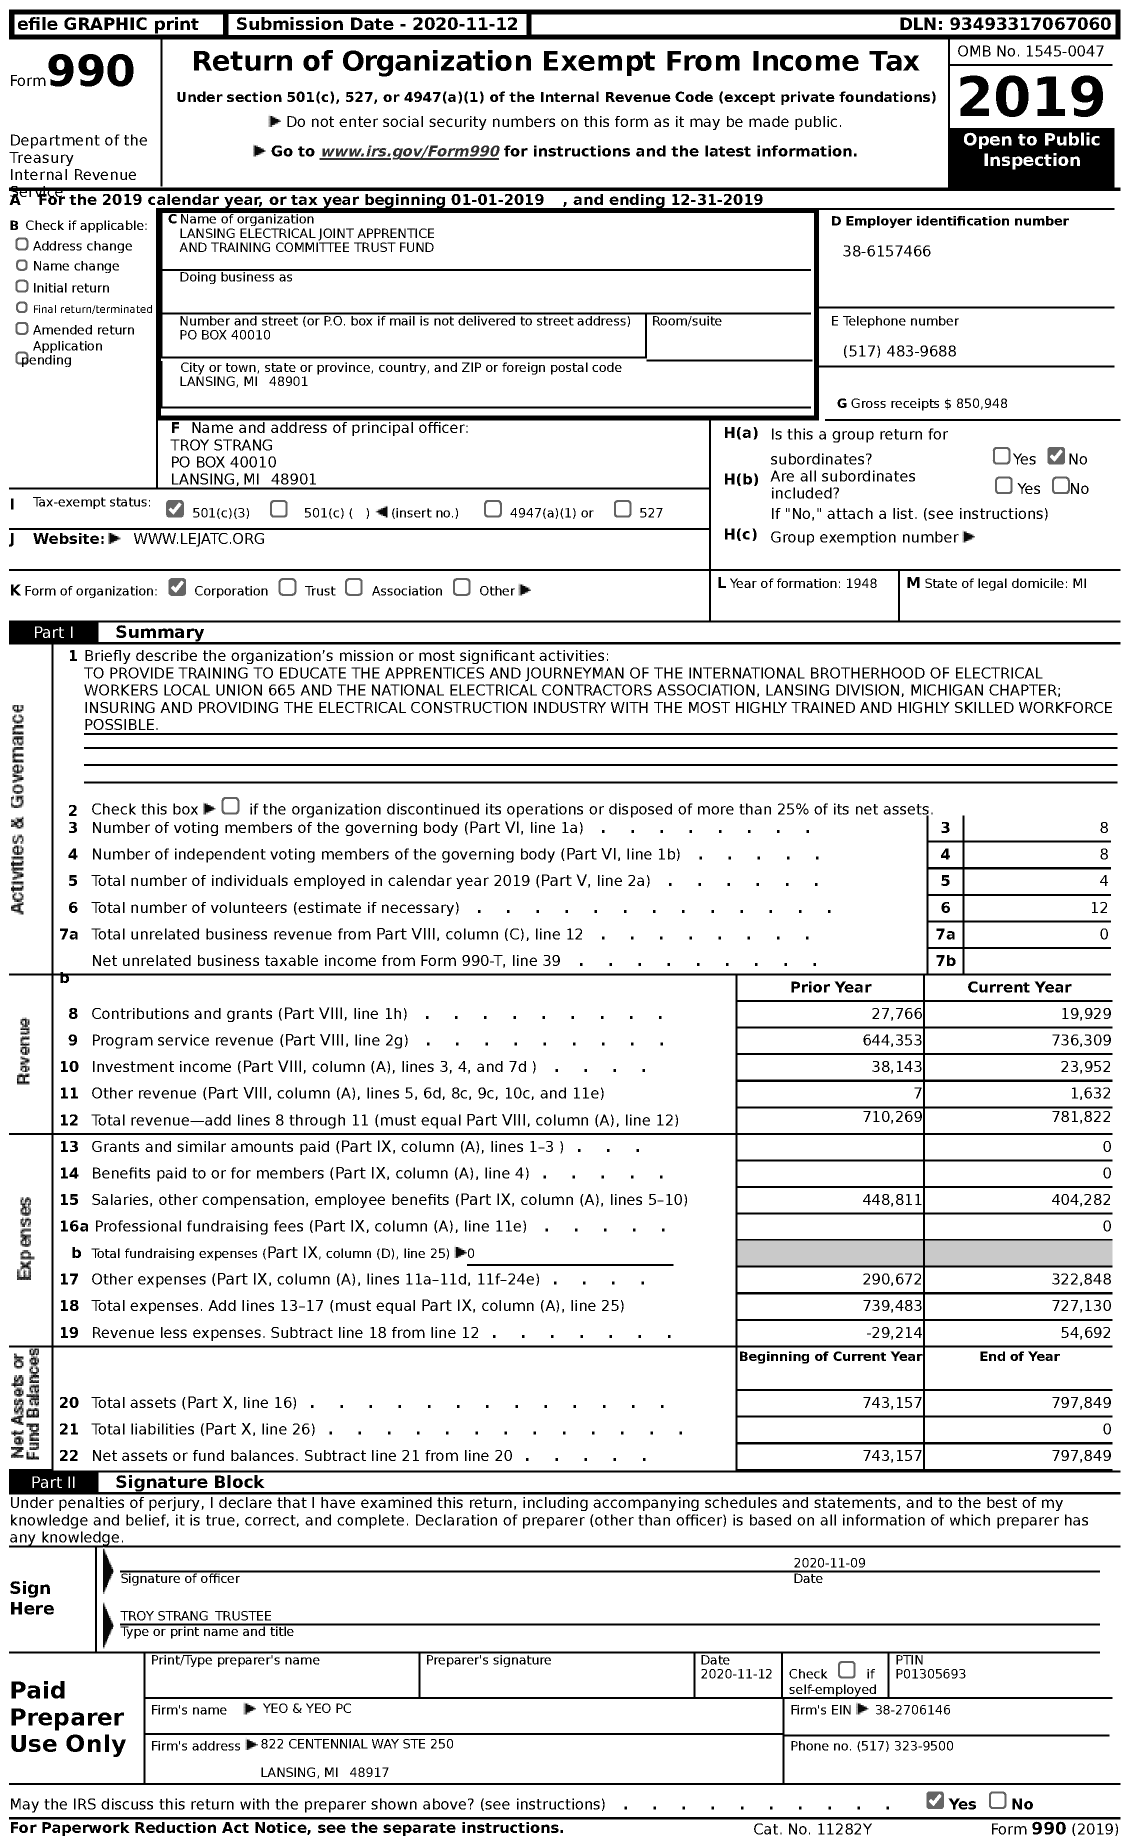 Image of first page of 2019 Form 990 for Lansing Electrical Joint Apprentice and Training Committee Trust Fund